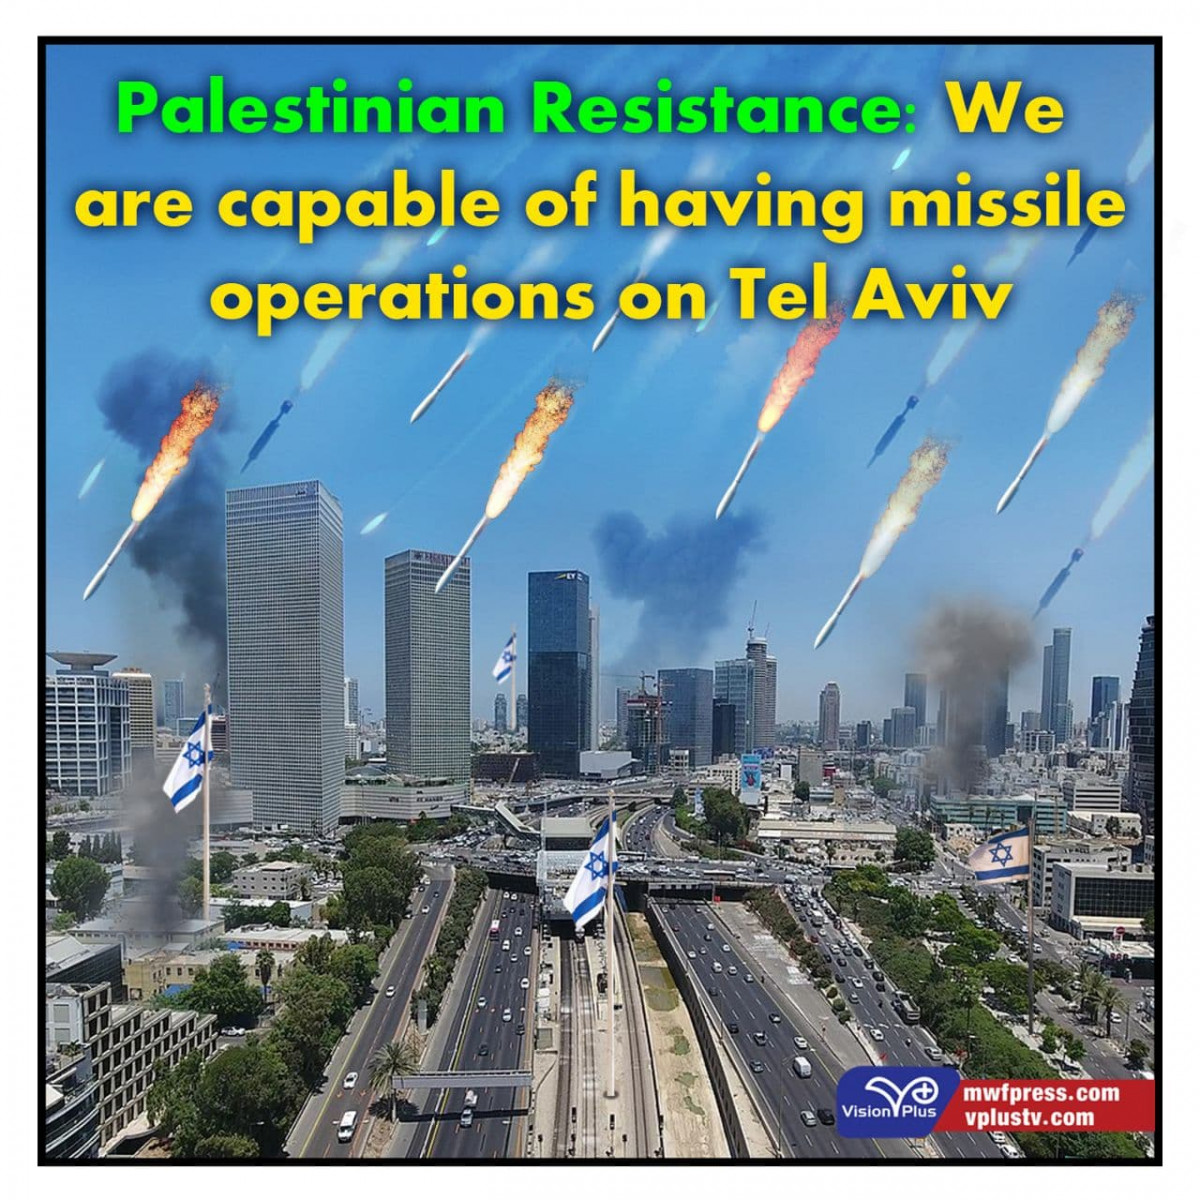 Palestinian Resistance: We are capable of having missile operations on Tel Aviv